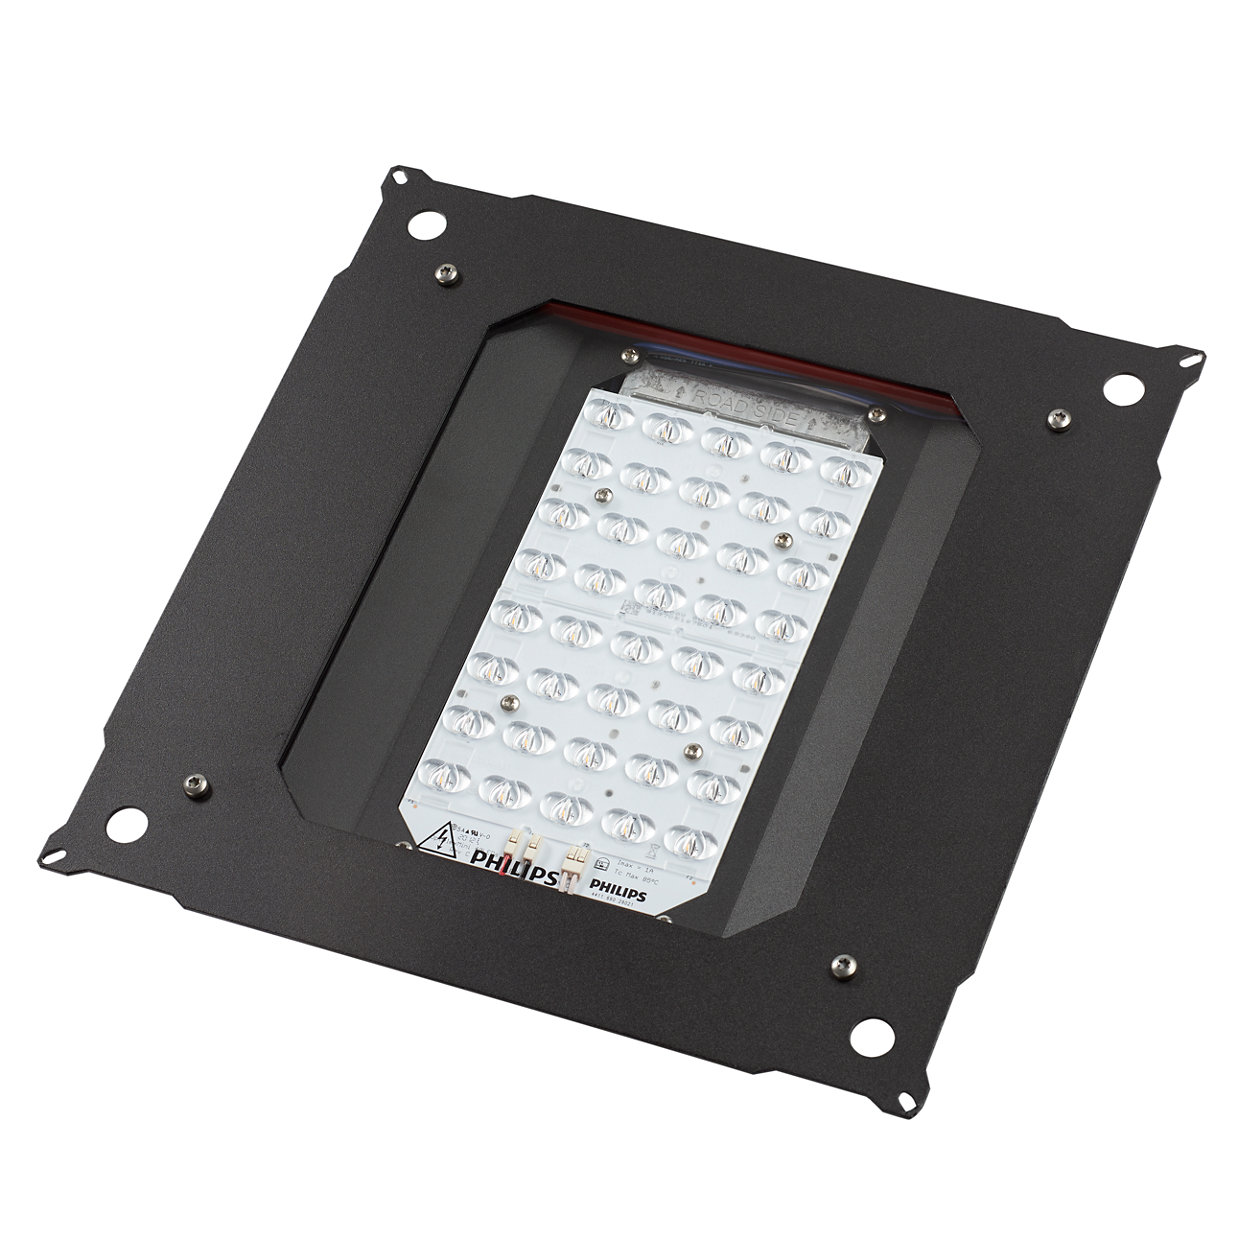 Upgrading your traditional luminaire installation base to a more energy-efficient, future-proof LED alternative.